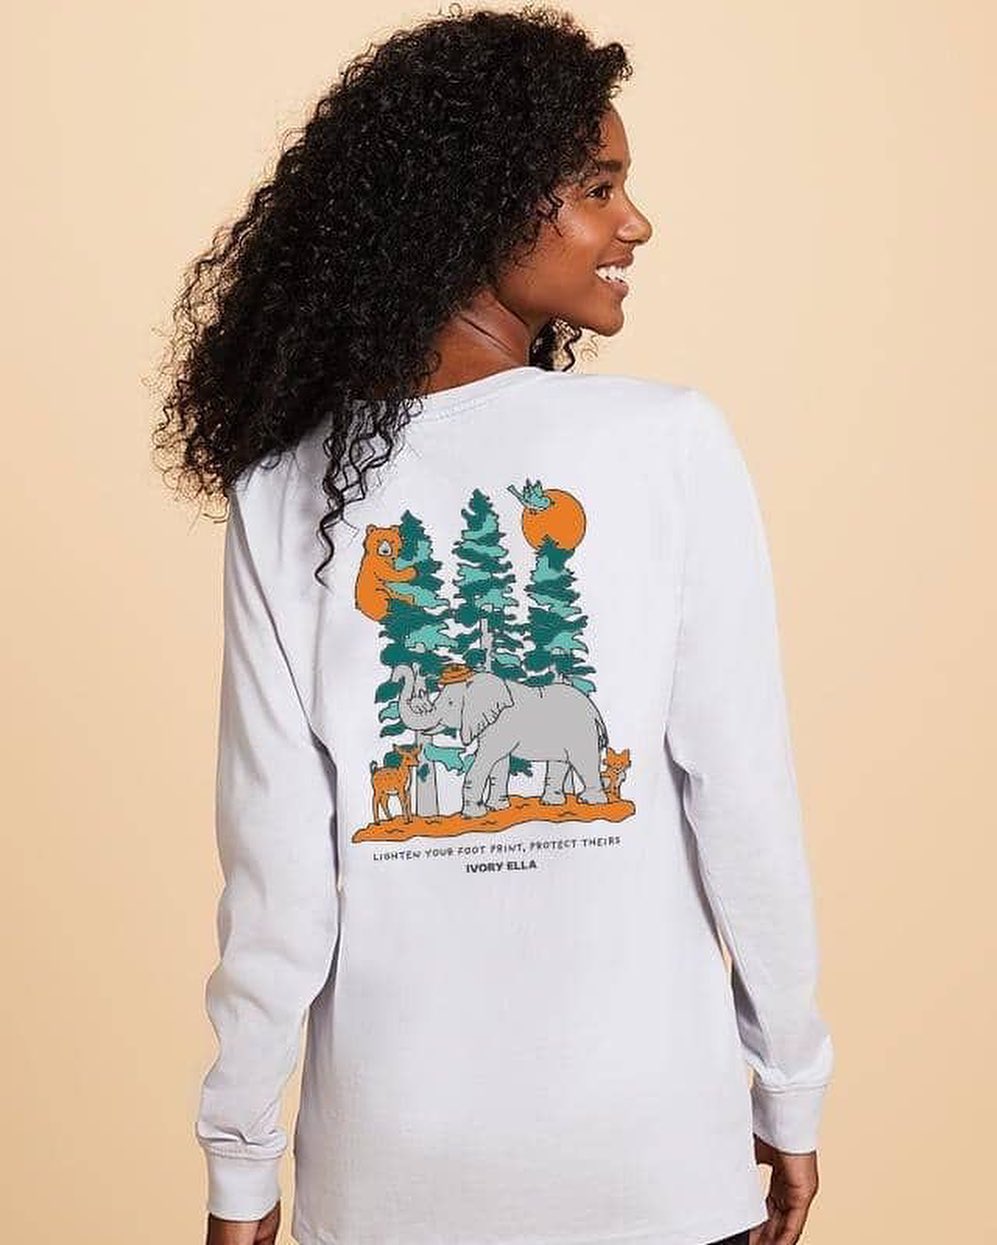 Ivory Ella - It's here! You voted and we created. Our Wildfire Recovery Tee is officially available, and every purchase makes a difference 🐻 🌲 🐿️ 100% of net profits from this style will be donated di...